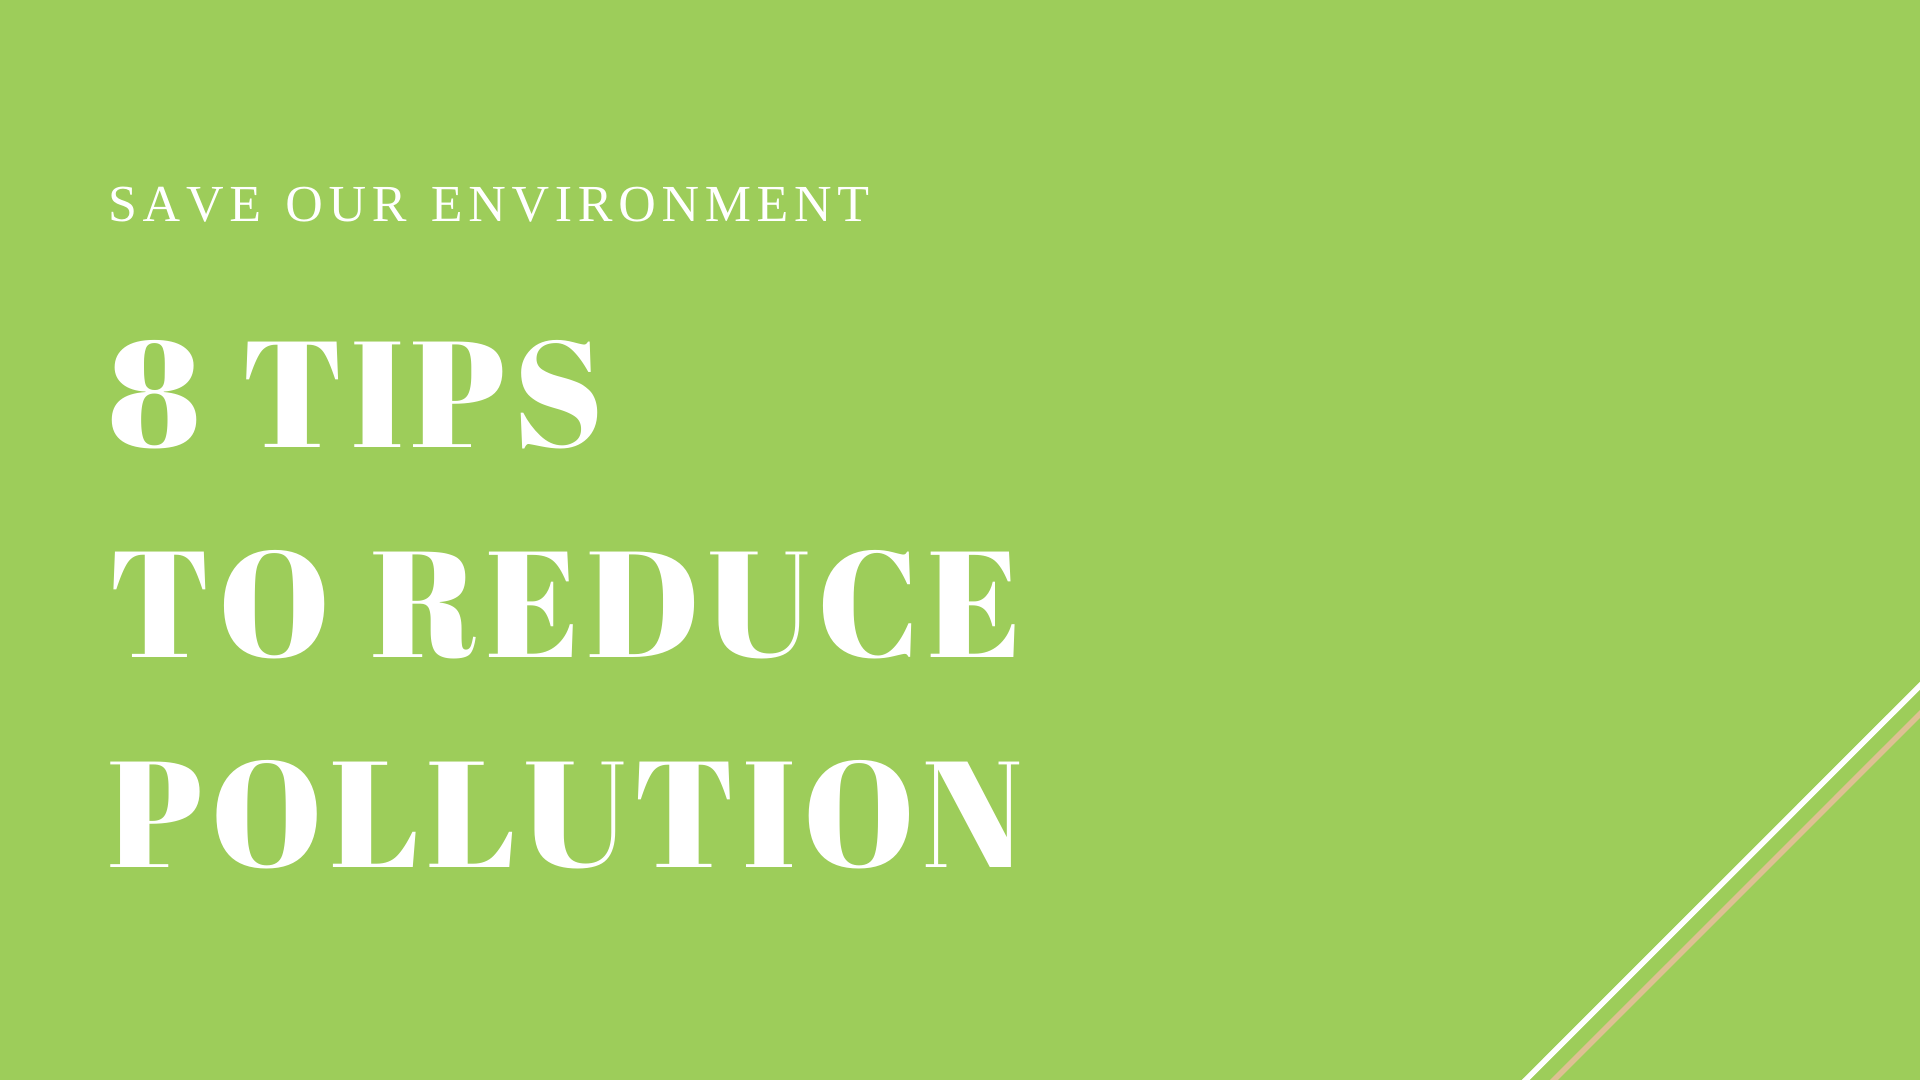 https://www.voicesofyouth.org/sites/voy/files/images/2022-03/7_tips_to_reduce_pollution_1.png